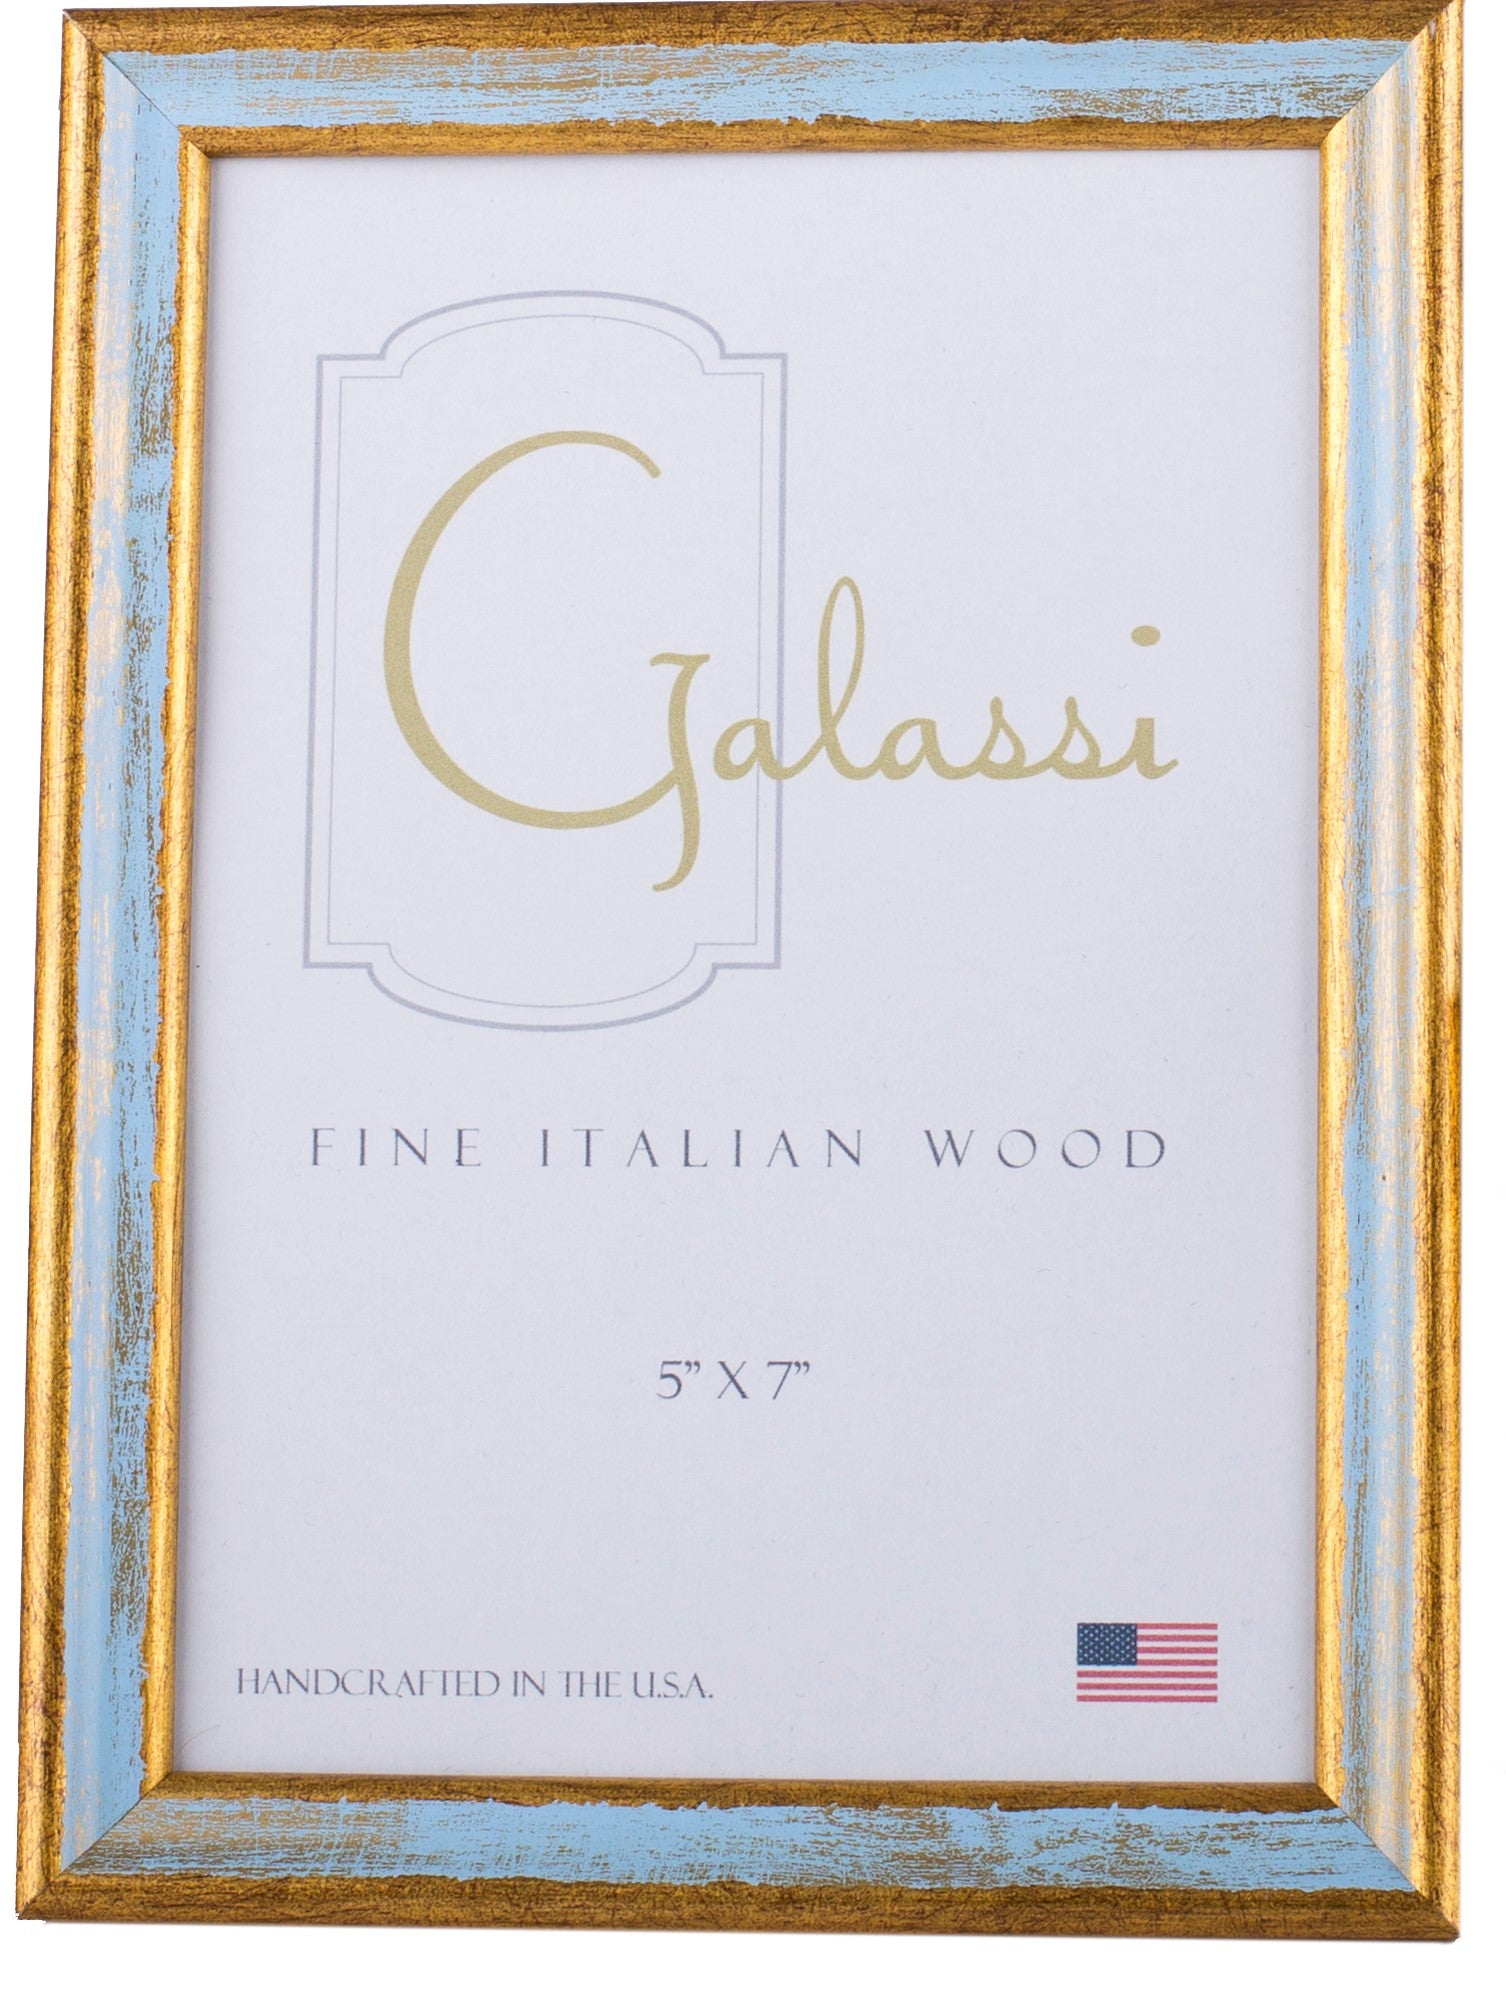 Blue and Gold Wood Frame